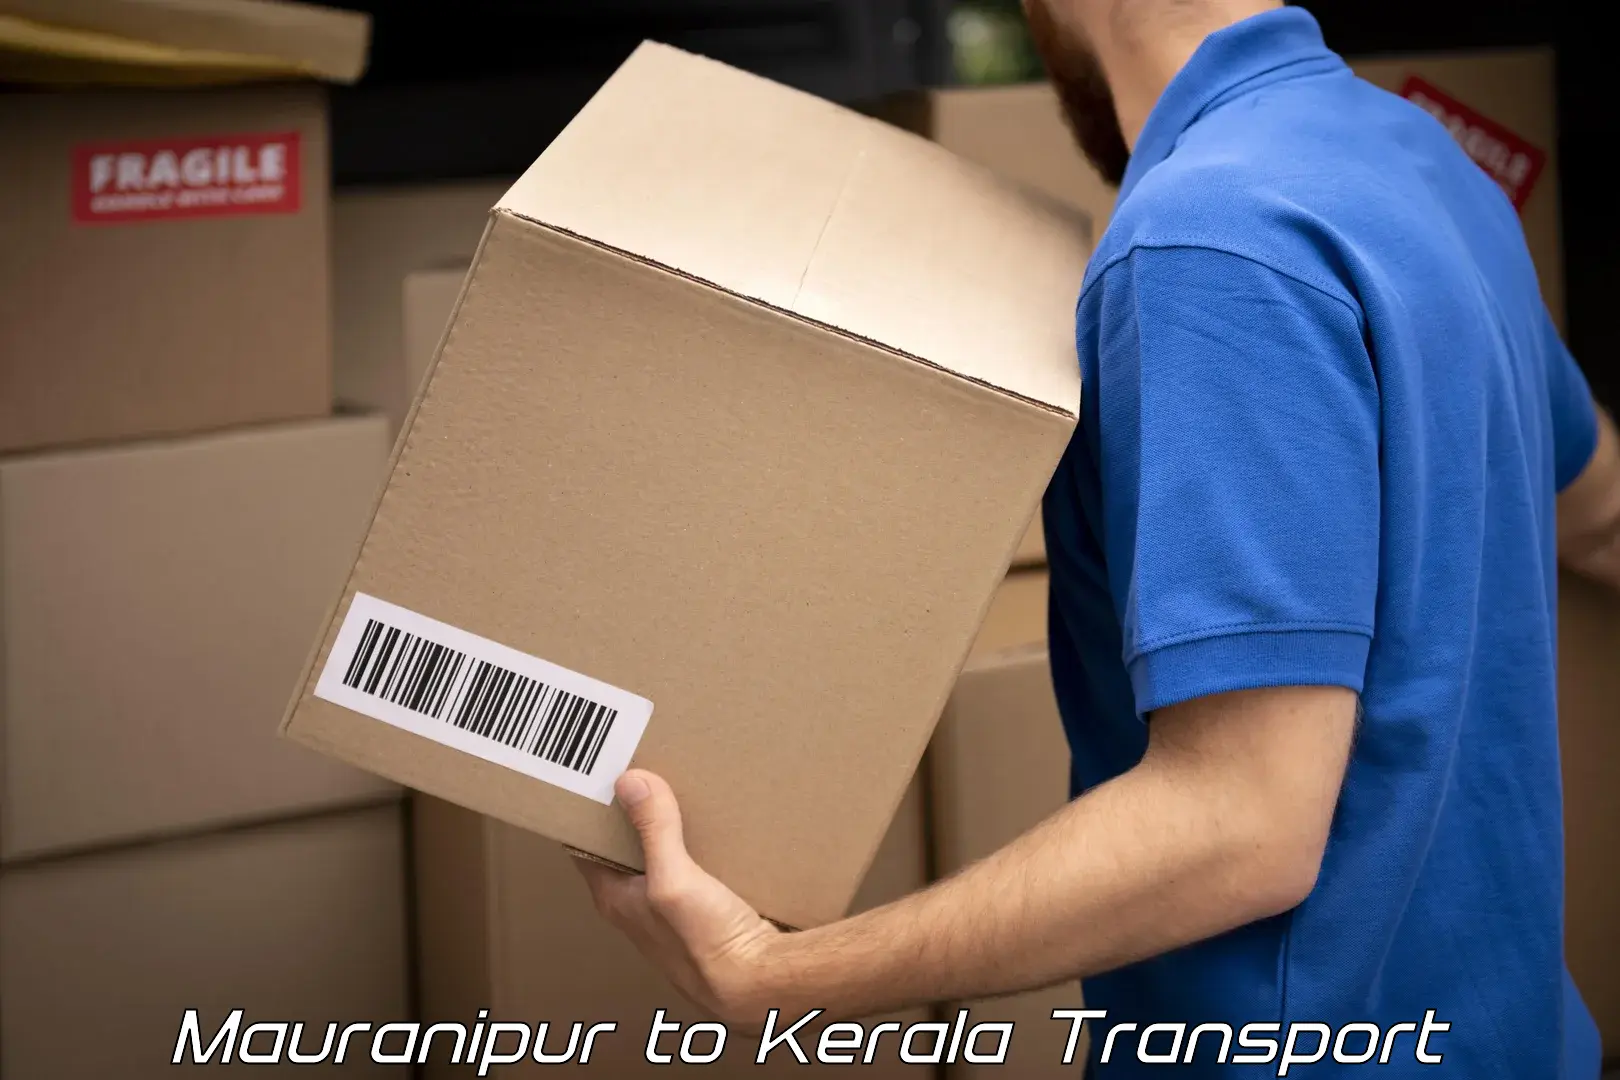 Commercial transport service Mauranipur to Kottayam